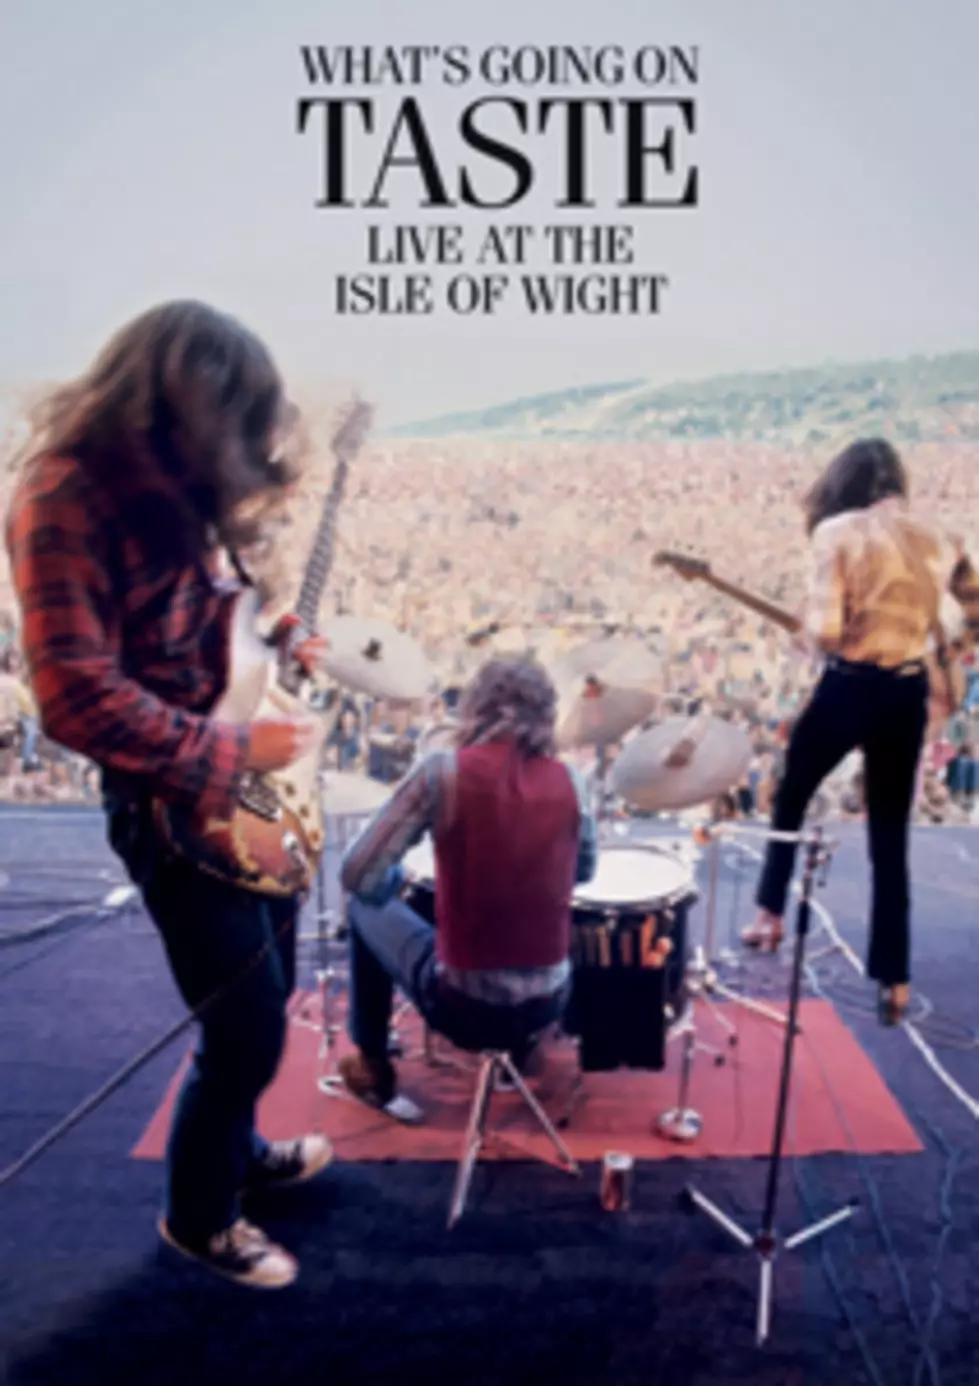 Rory Gallagher and Taste, &#8216;What&#8217;s Going On: Live at the Isle of Wight': DVD Review